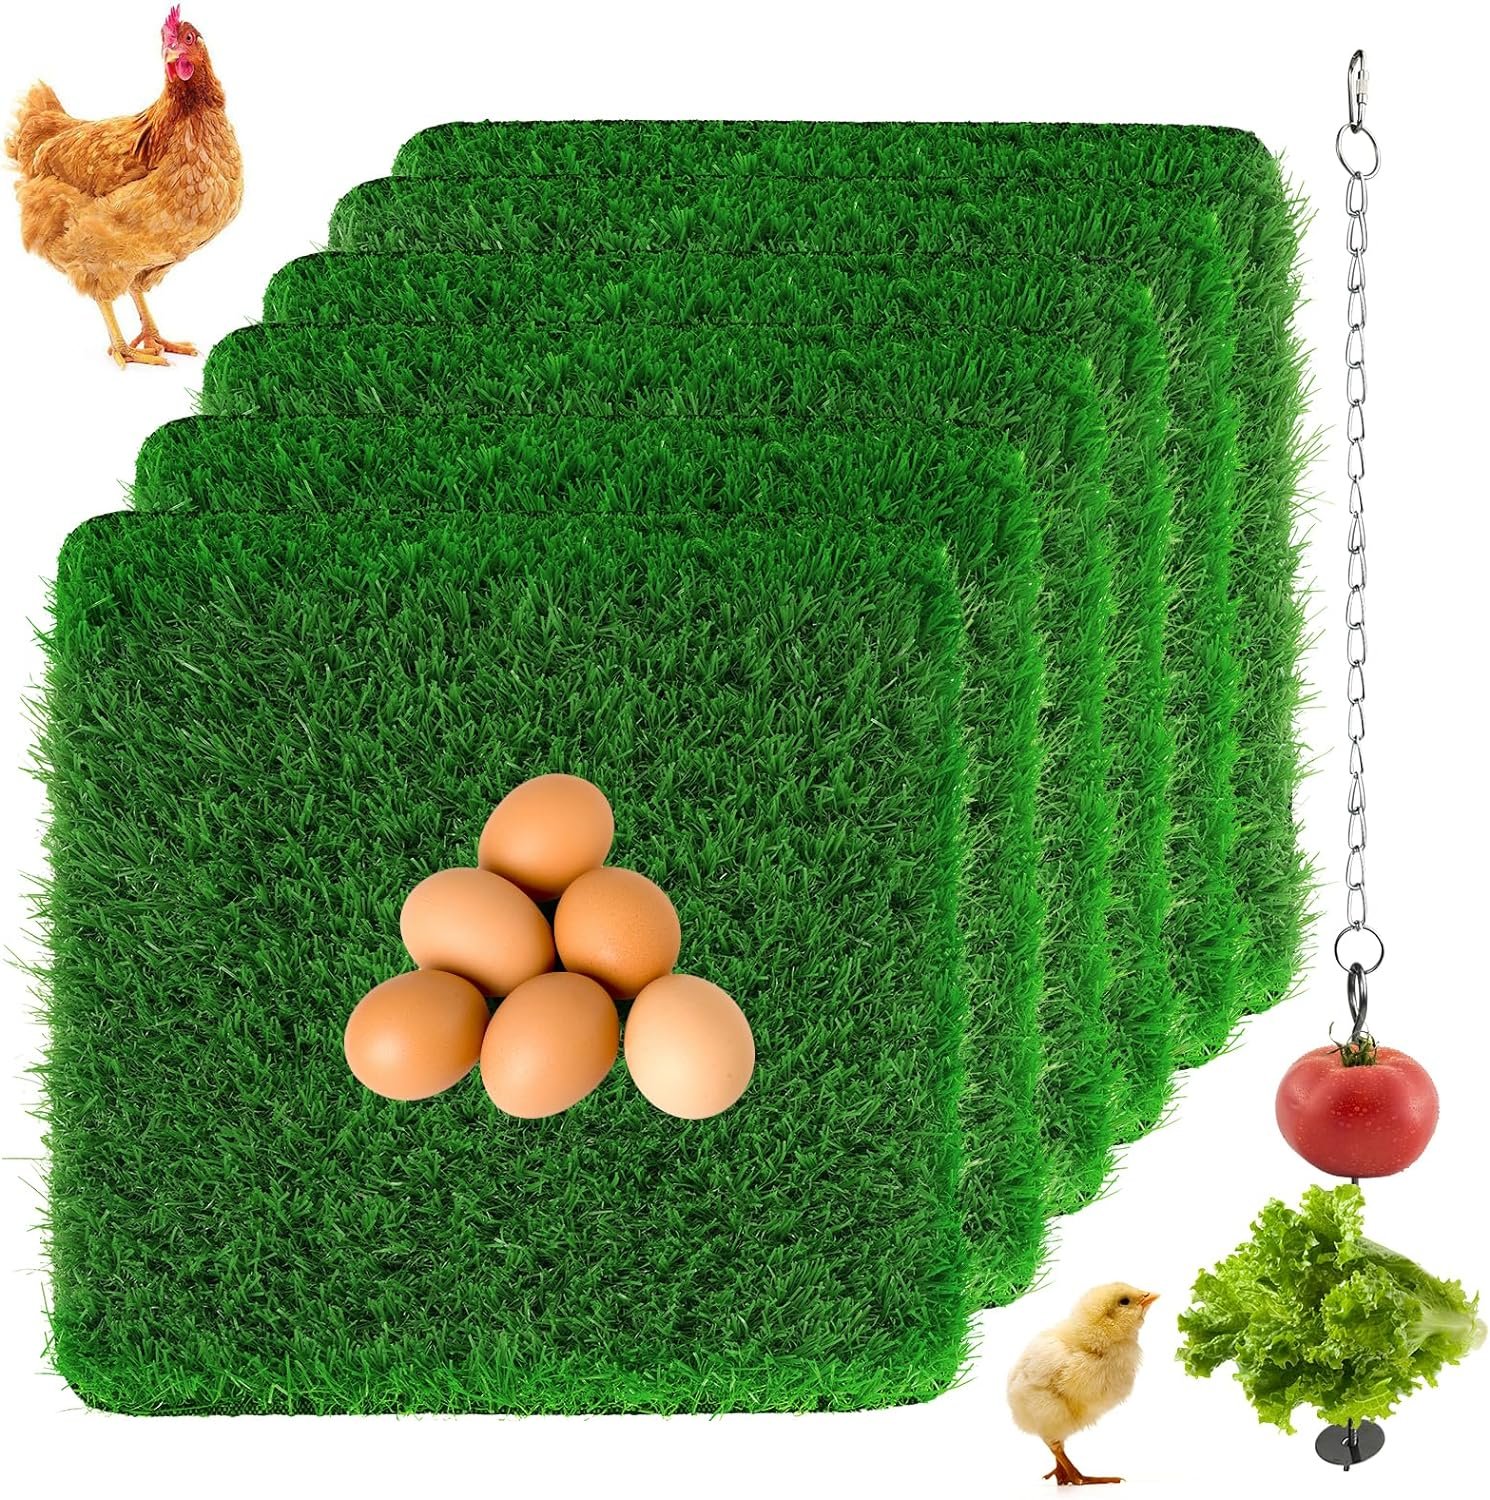 Oziyrnka 6Pcs Poultry Chicken Nesting Pads 12*12*1.57+ 1Pcs Chicken Veggies Skewer, Nesting Box Pads for Chickens Reusable, Washable Chicken Nest Mat, Premium Nesting Box Pads for Laying Eggs